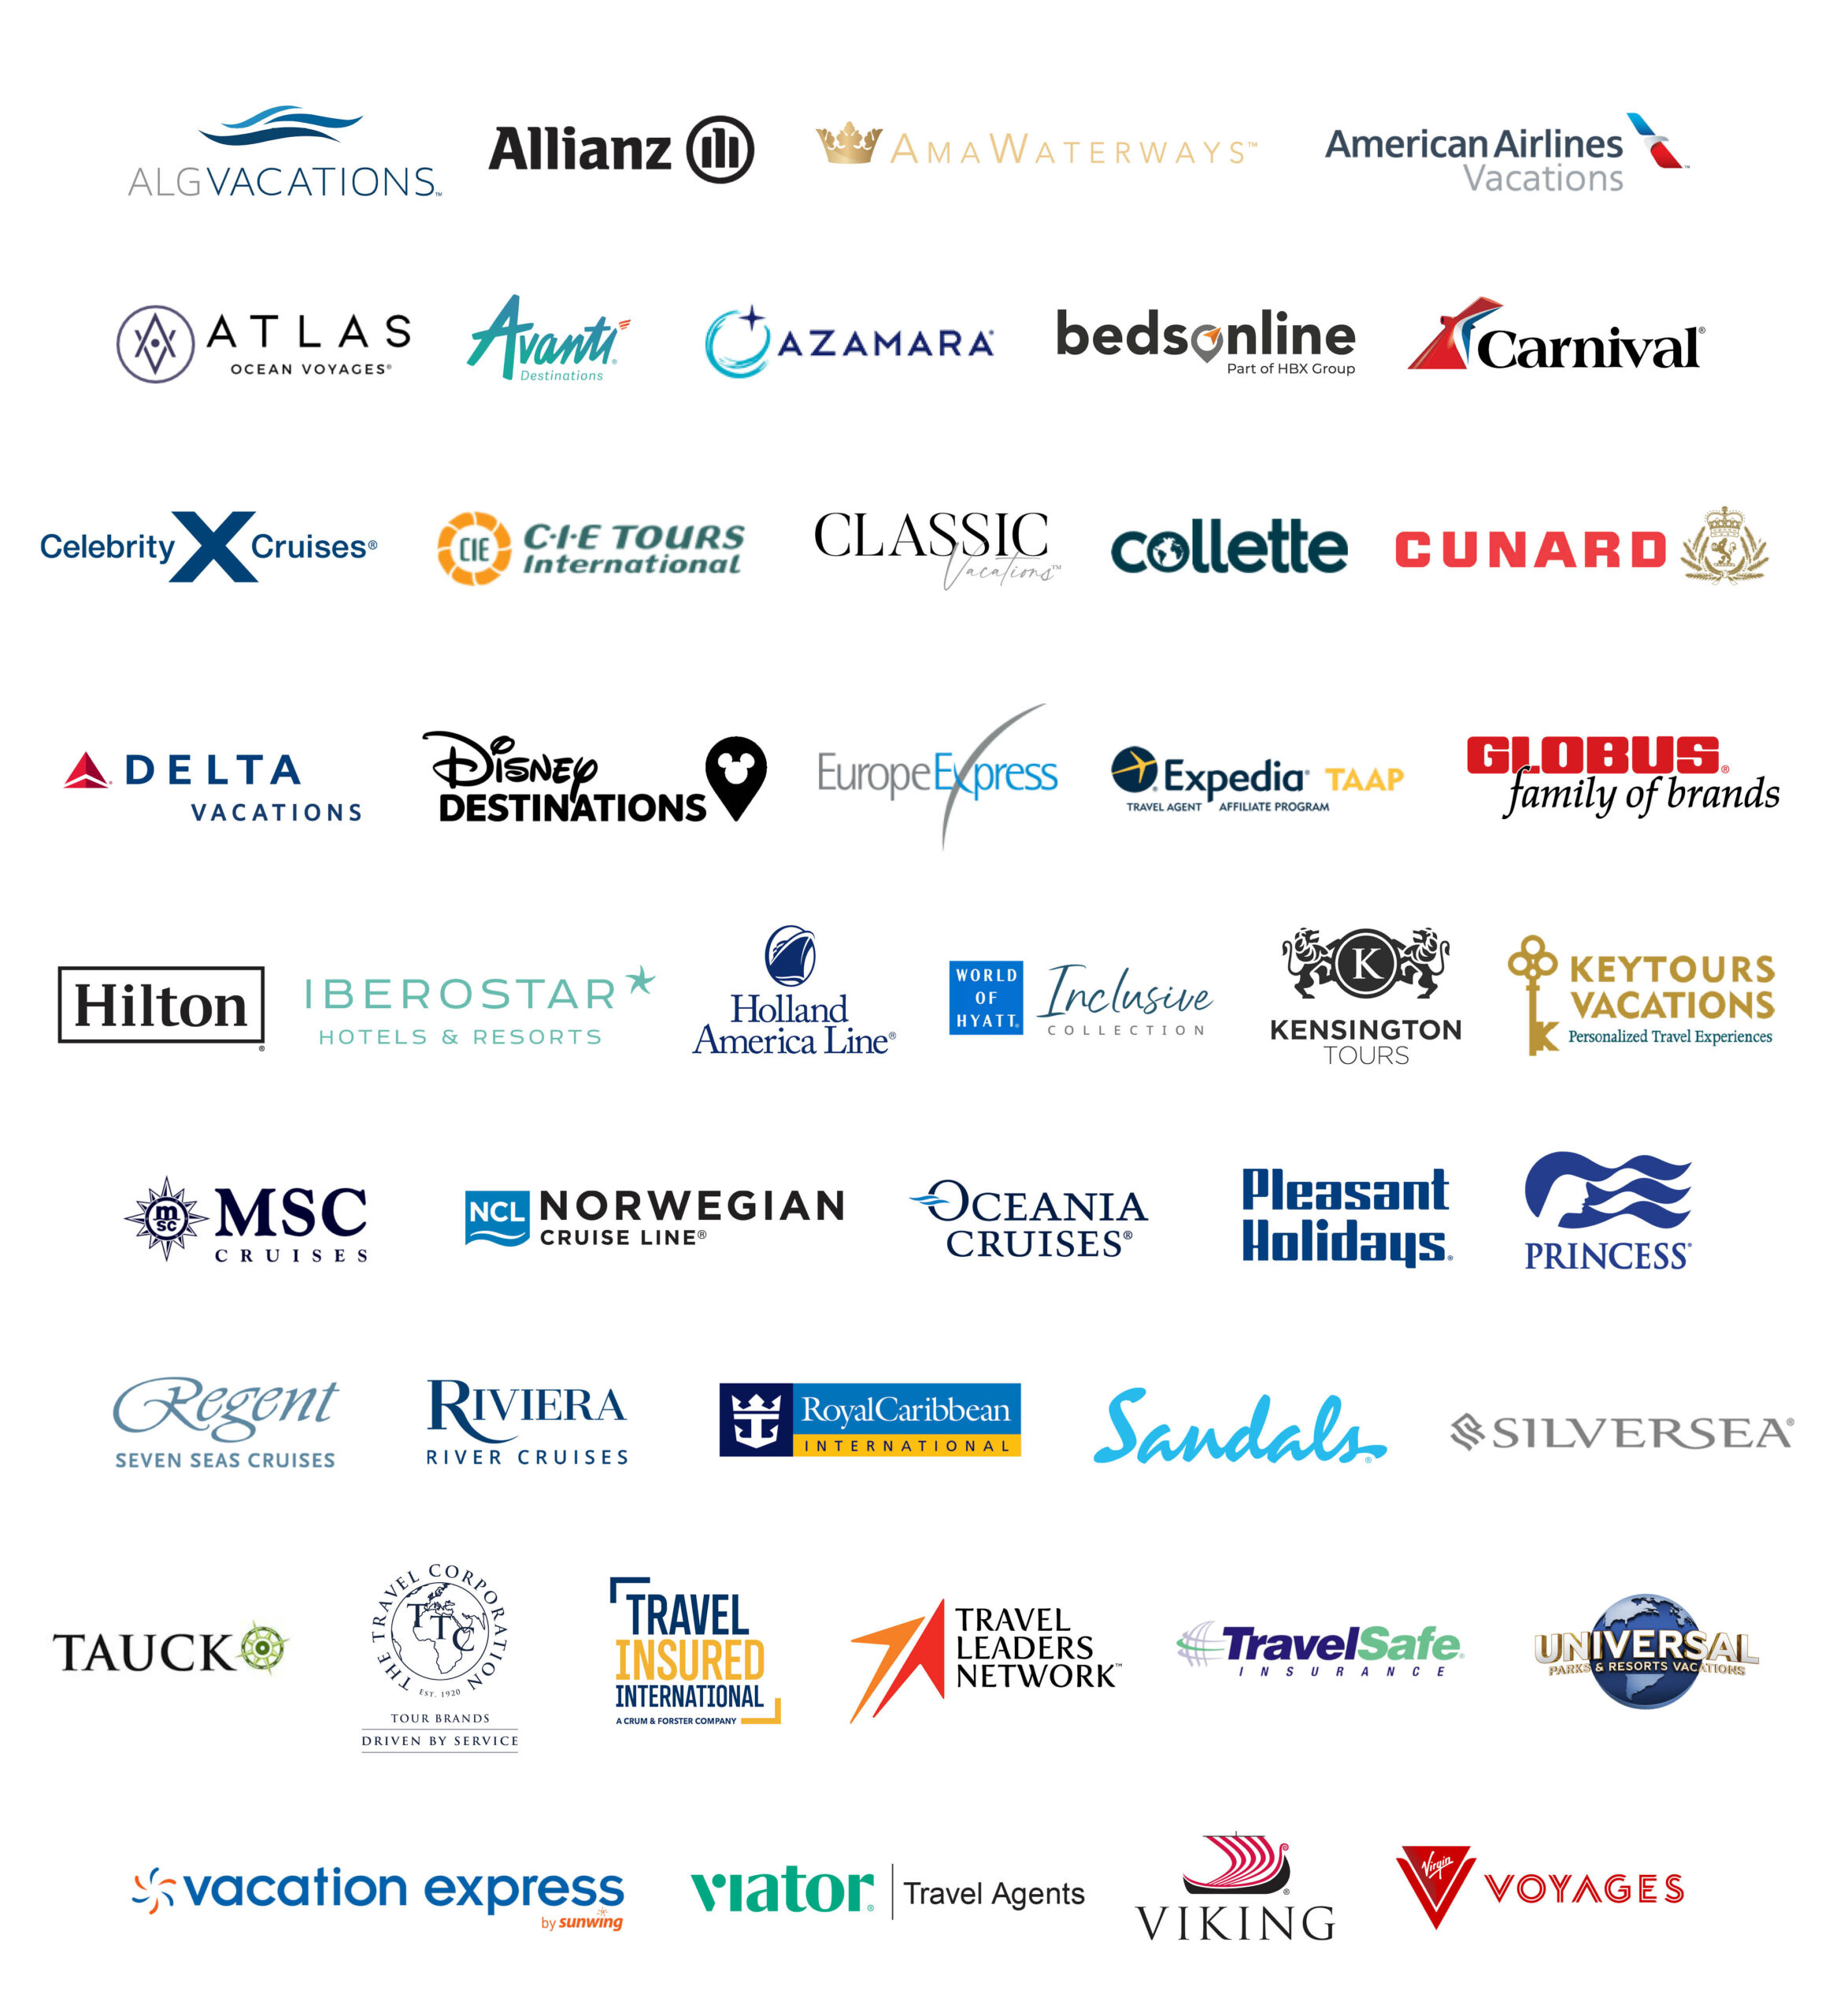 KHM Travel Group Supplier Partners for 2024  "ALG Vacations, Allianz, AmaWaterways, American Airlines Vacations, Atlas Ocean Voyages, Avanti, Azamara, BendsOnline, Carnival, Celebrity Cruises, CIE Tours, Classic Vacations, Collette, Cunard, Delta Vacations, Disney Destinations, Europe Express, Expedia TAAP, Globus family of brands, Hilton, Iberostar, Holland America Line, Inclusive Collection a part of Hyatt Hotels & Resorts, Kensington Tours, KeyTours, MSC Cruises, Norwegian Cruise Line, Oceania Cruises, Pleasant Holidays, Princess, Riviera River Cruises, Regent, Royal Caribbean, Sandals, Silversea, Tauck, The Travel Corporation, Travel Insured International, Travel Leaders Network, Travel Safe, Universal, Vacation Express, Viator, Viking, Virgin Voyages"